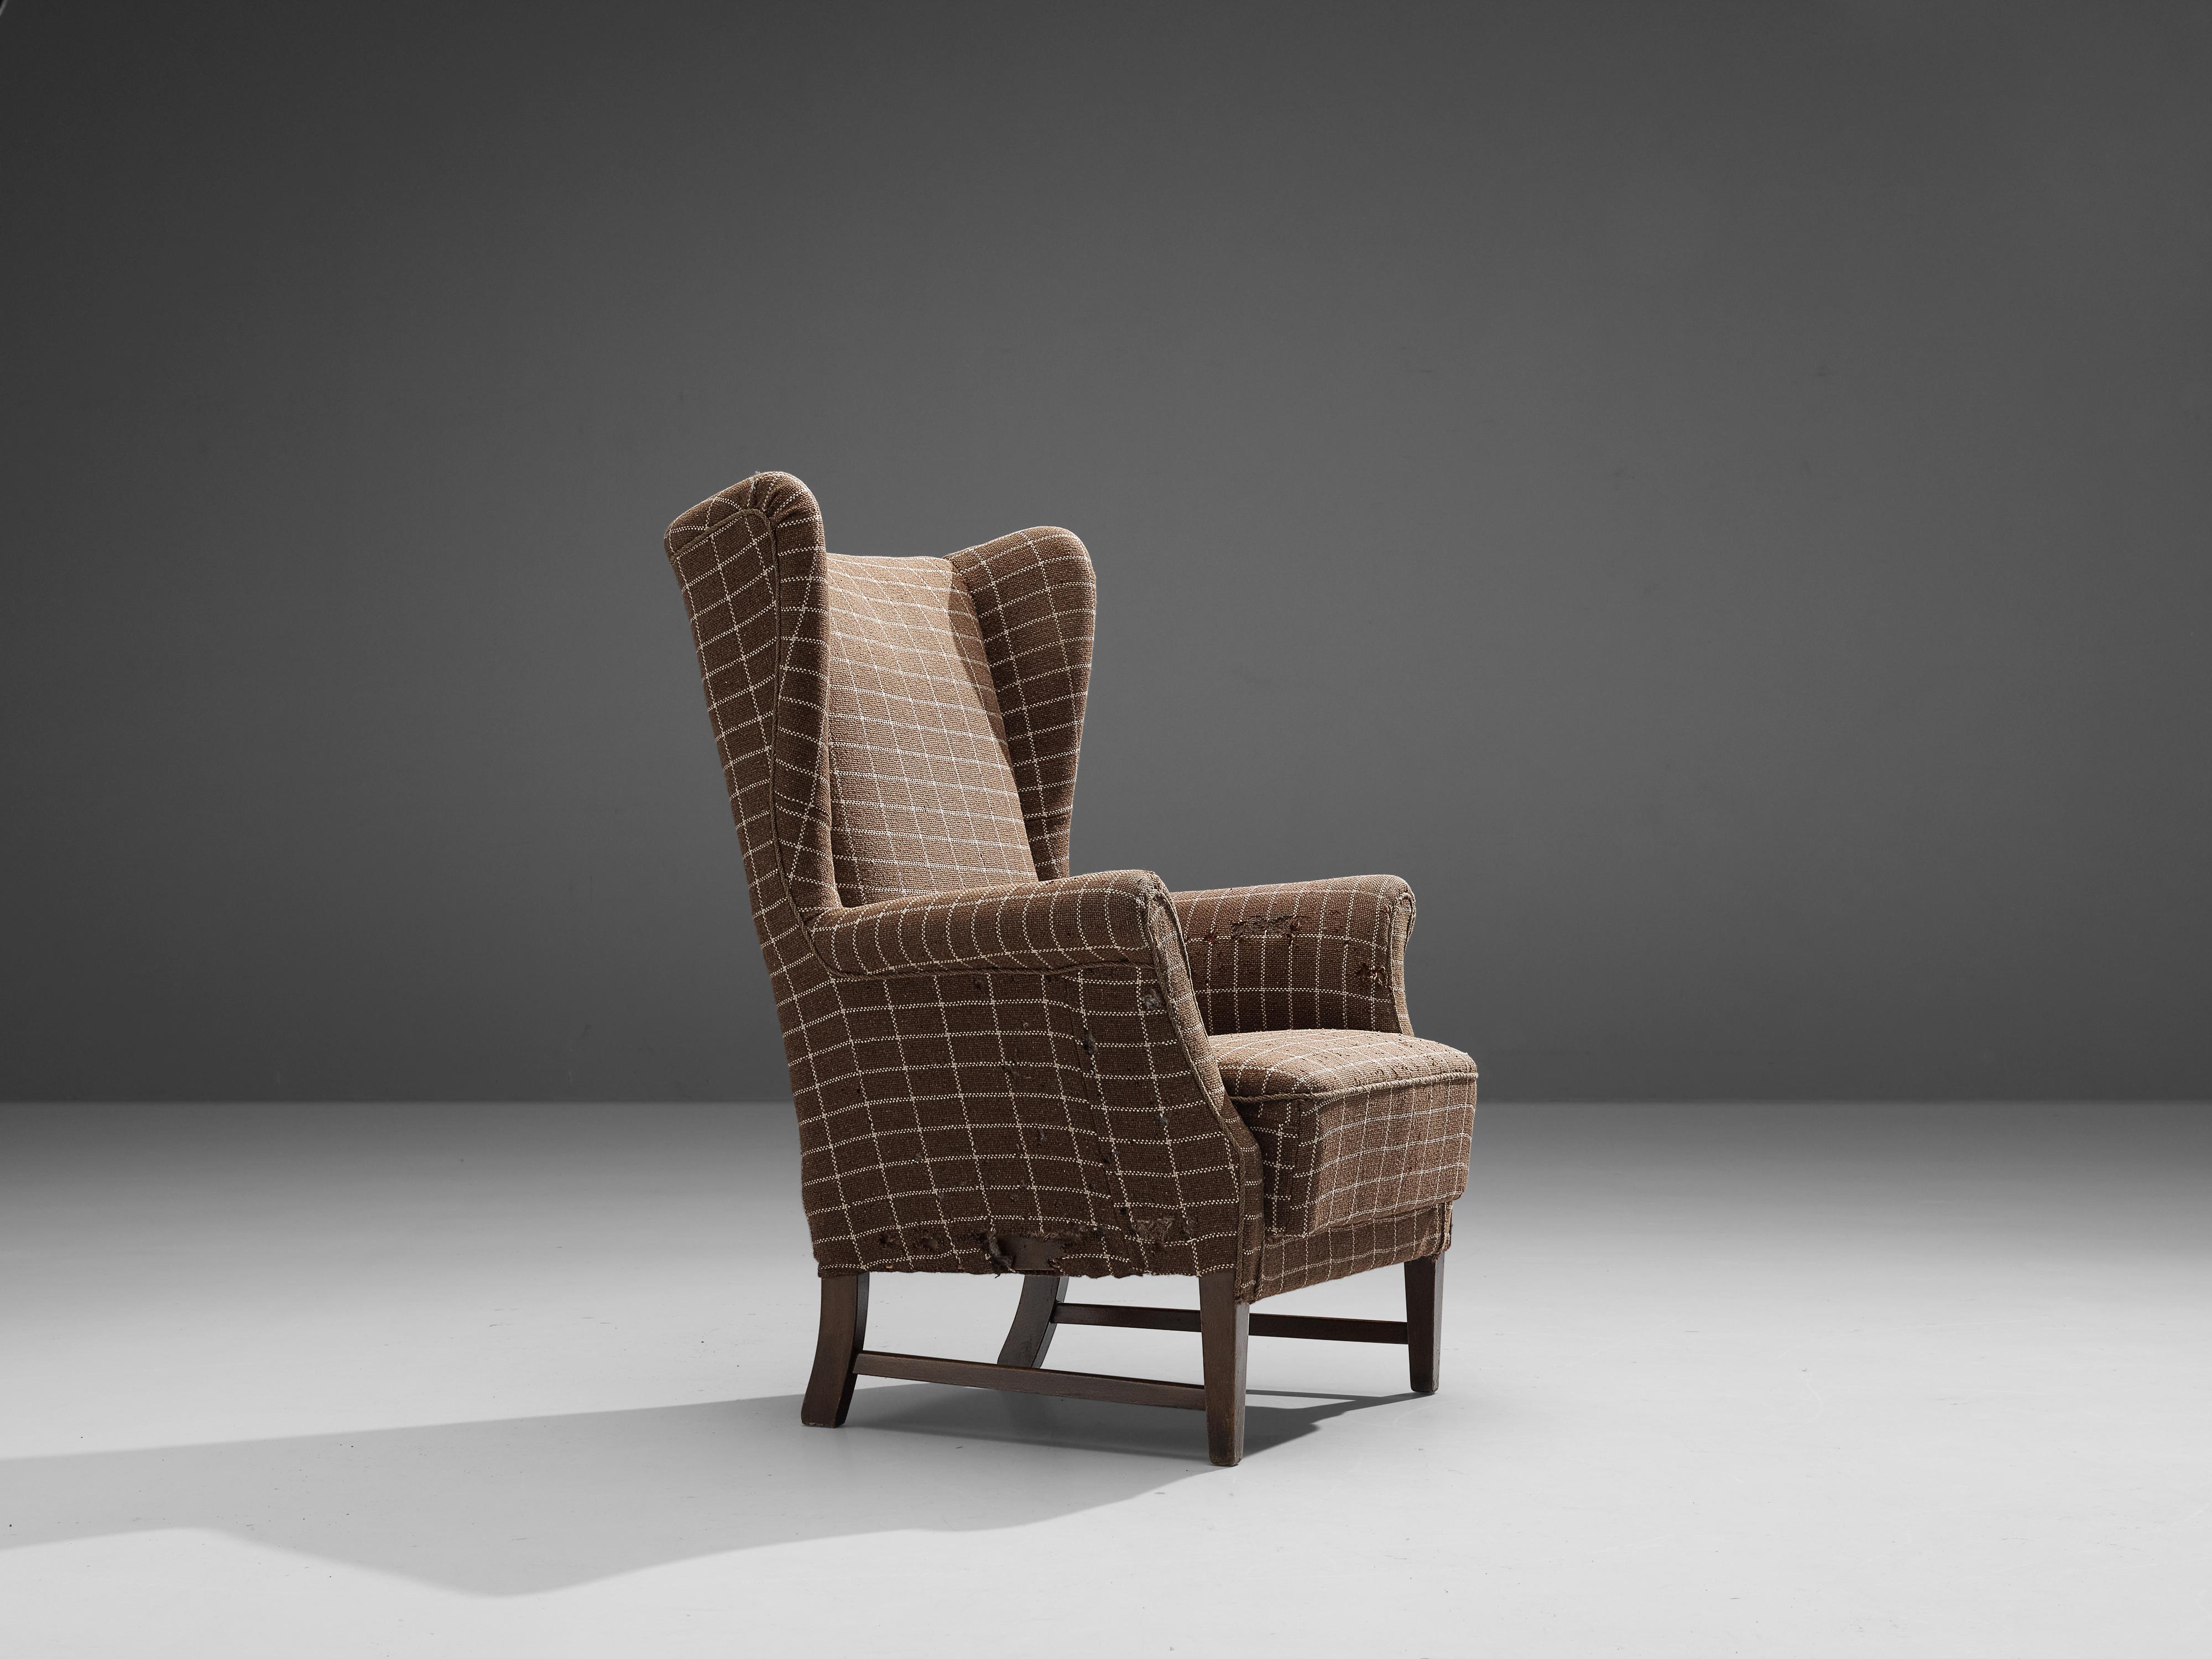 Fabric Danish Wingback Chair in Brown Checkered Upholstery